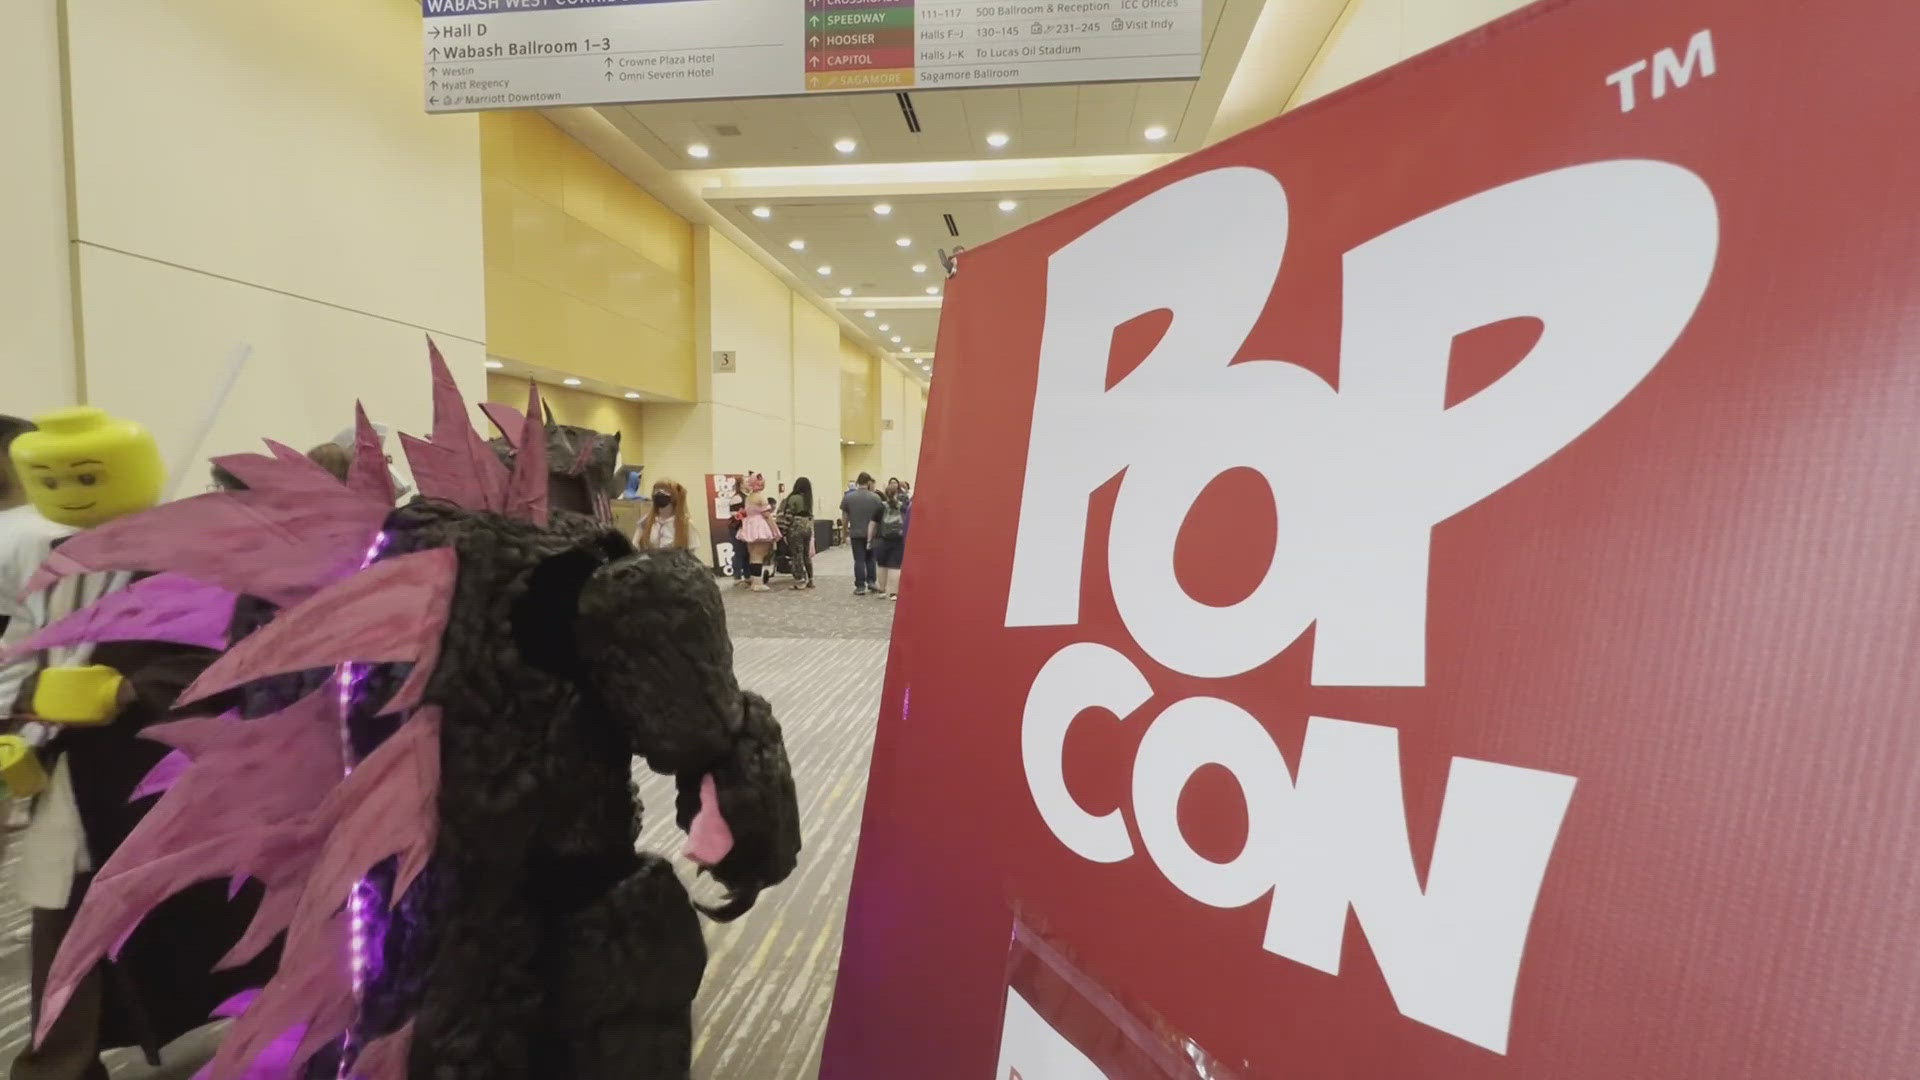 The convention celebrates all things pop culture.